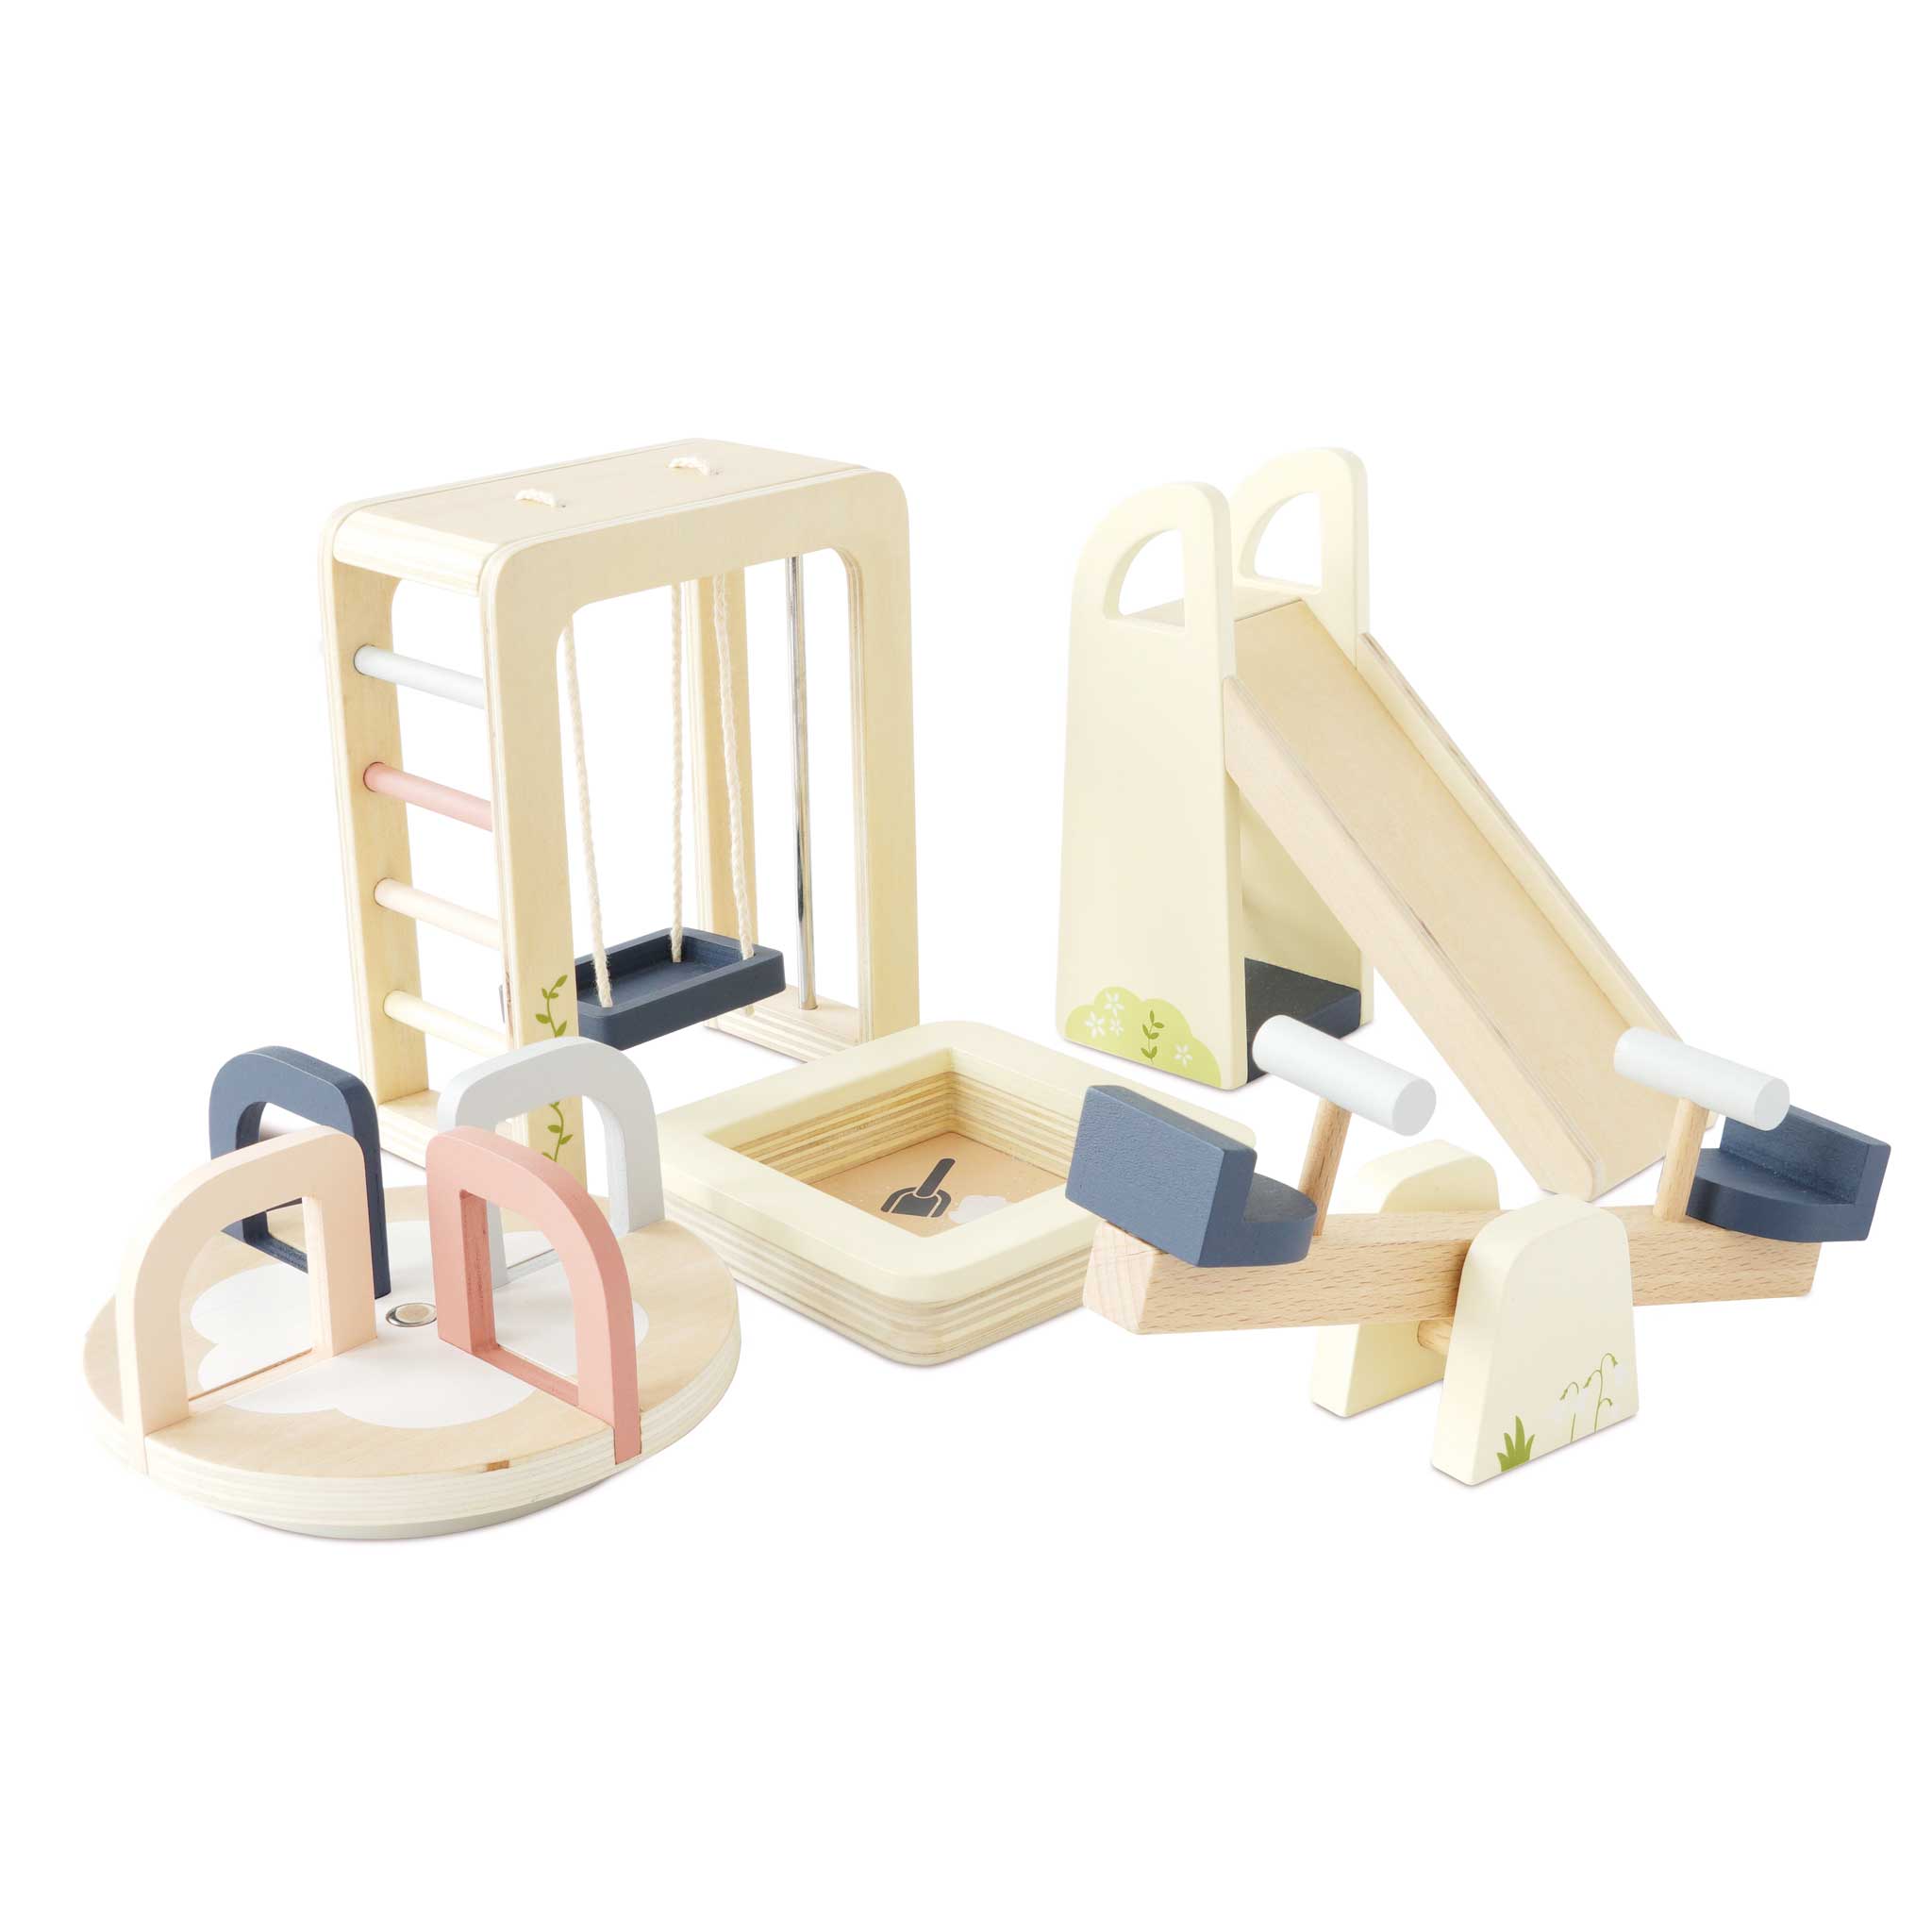 Dolls House Outdoor Play Furniture